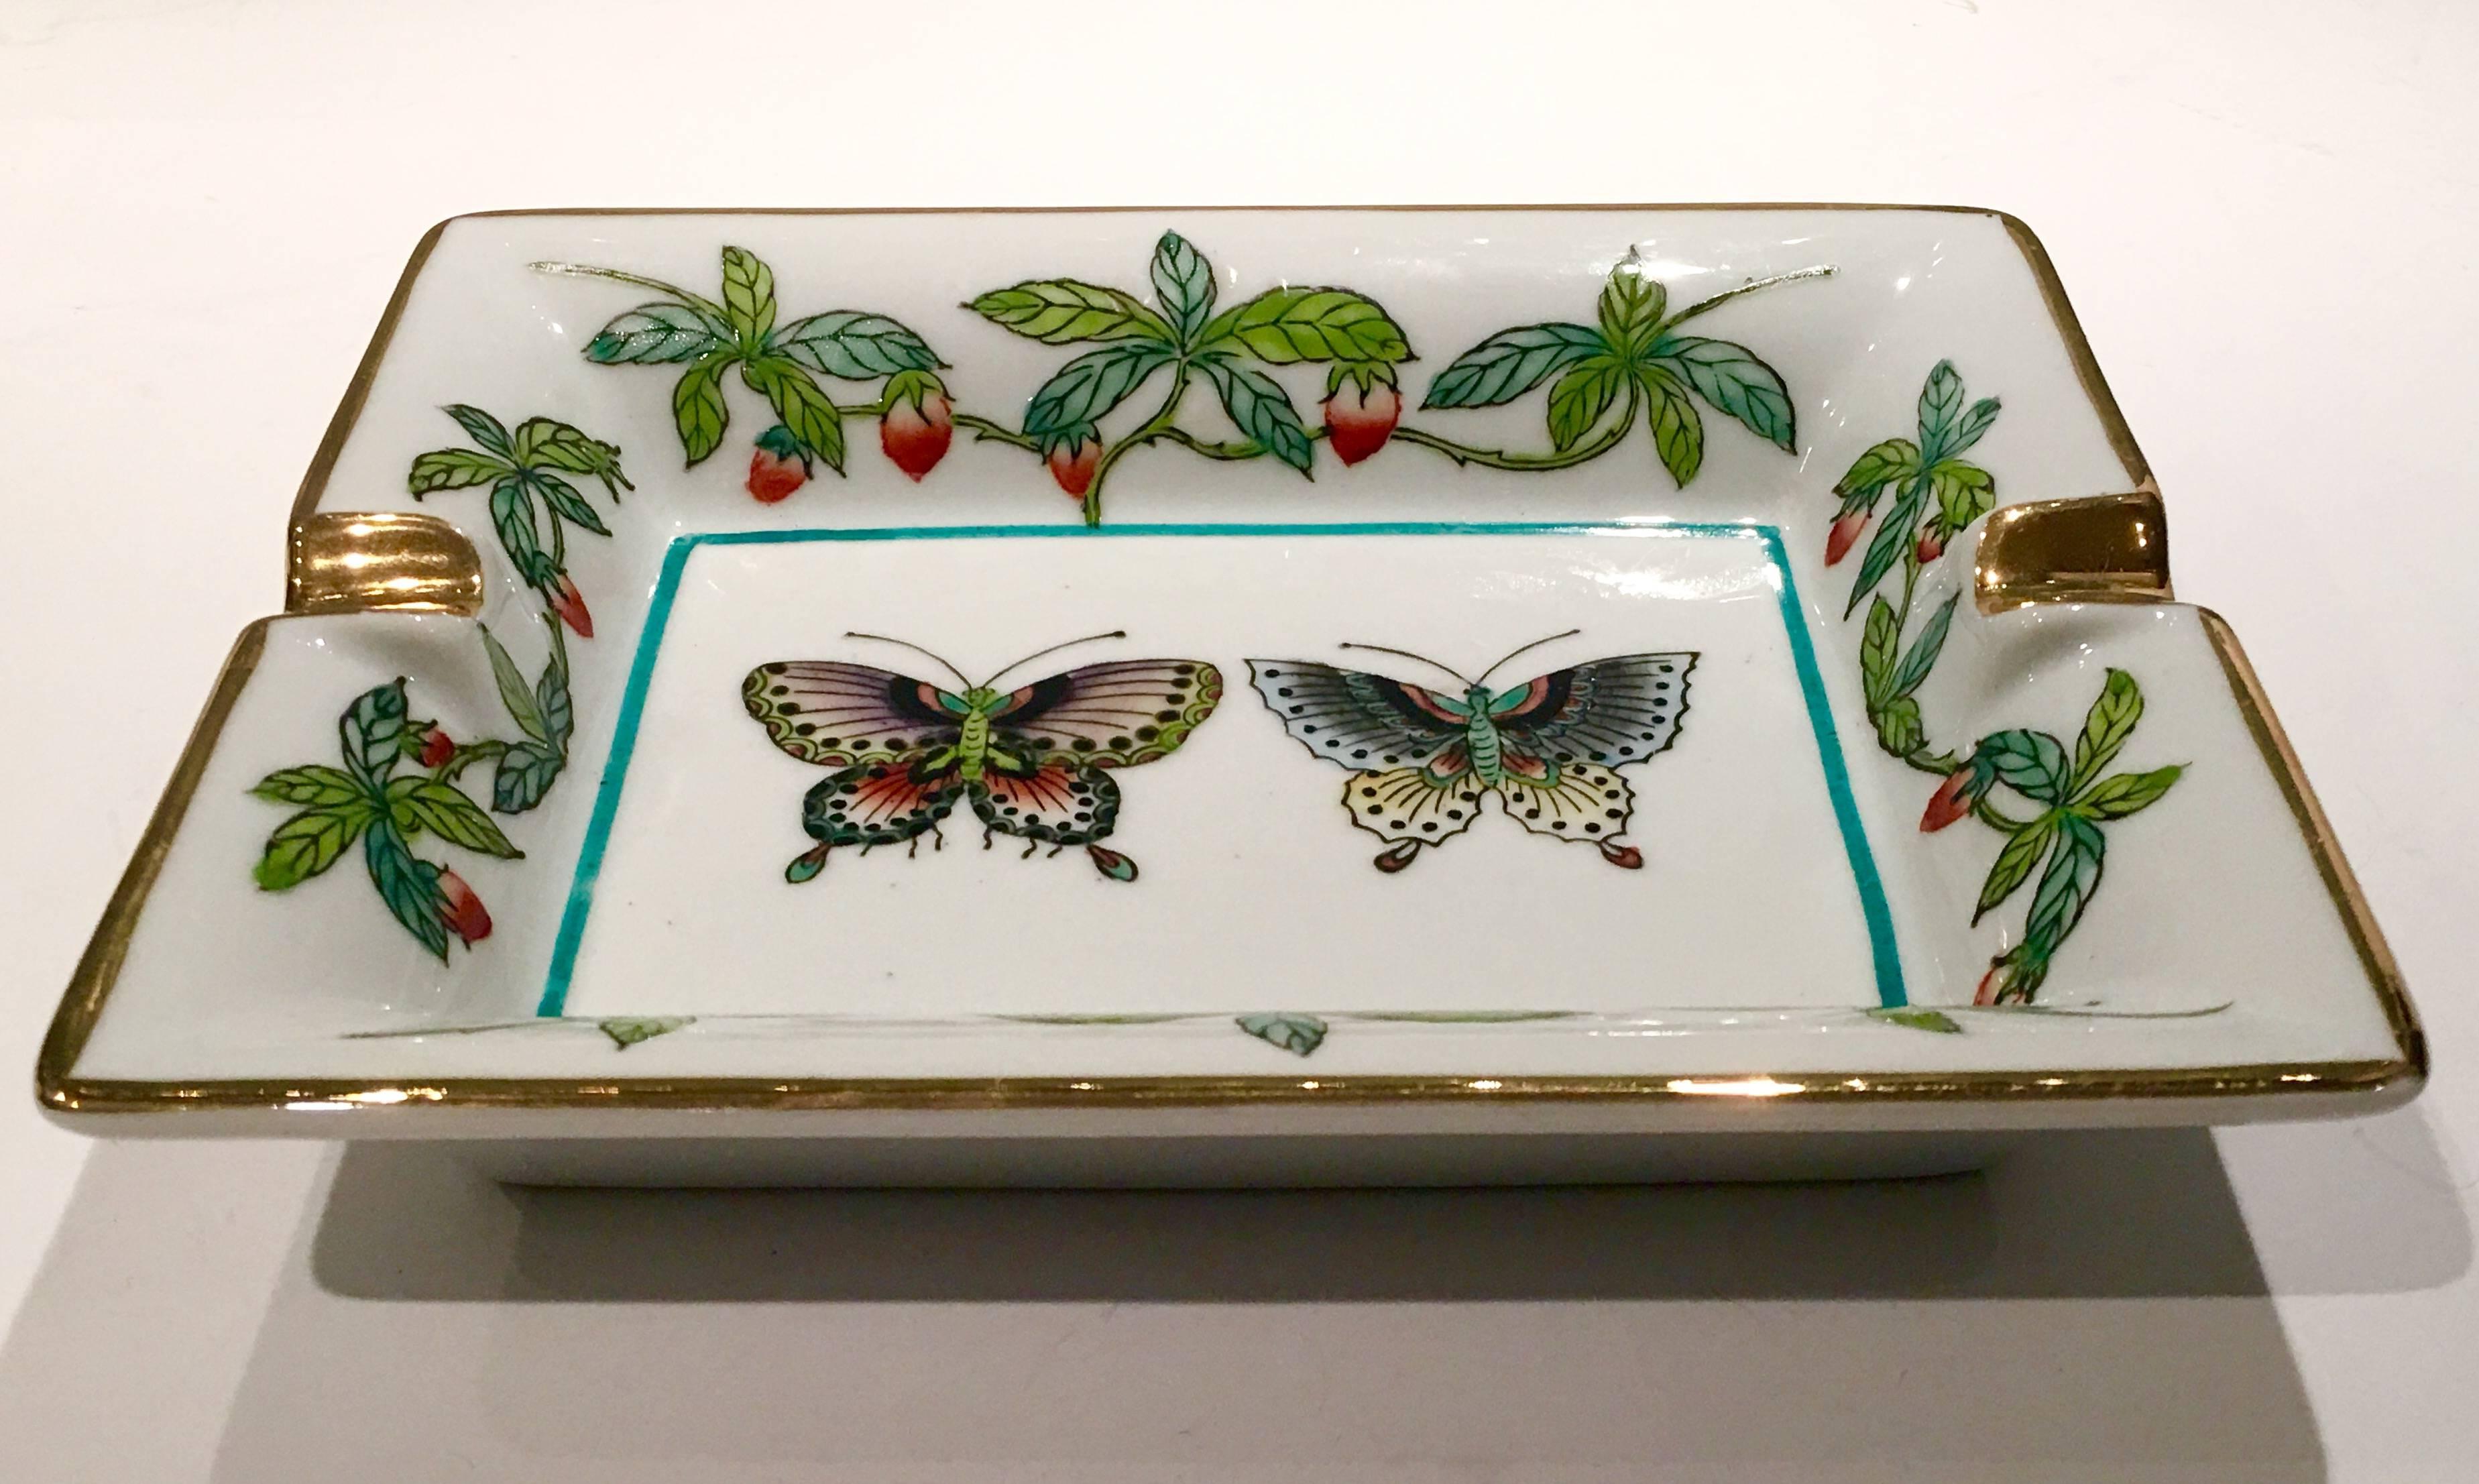 Chinese export porcelain butterfly motif with 22-karat gold detail Hermes style ashtray.